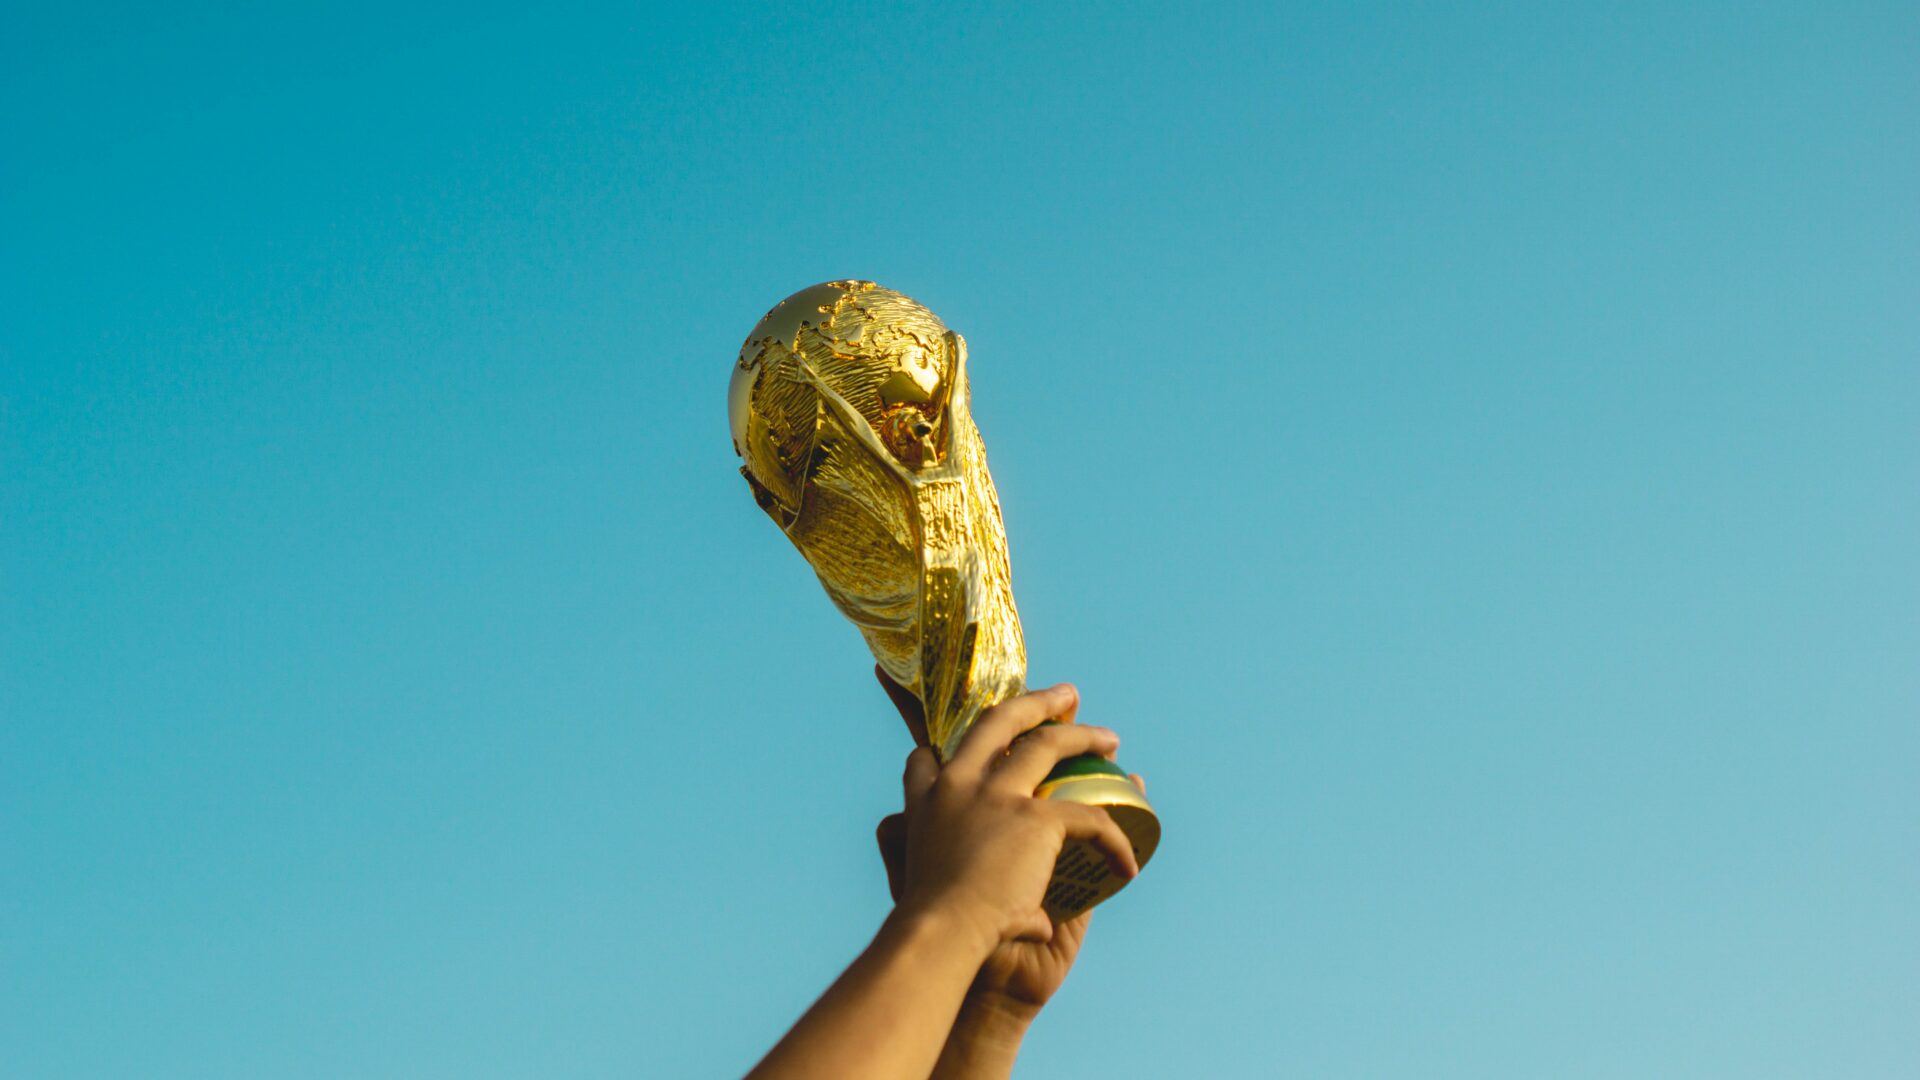 A Digital World Cup for the 32 National Teams